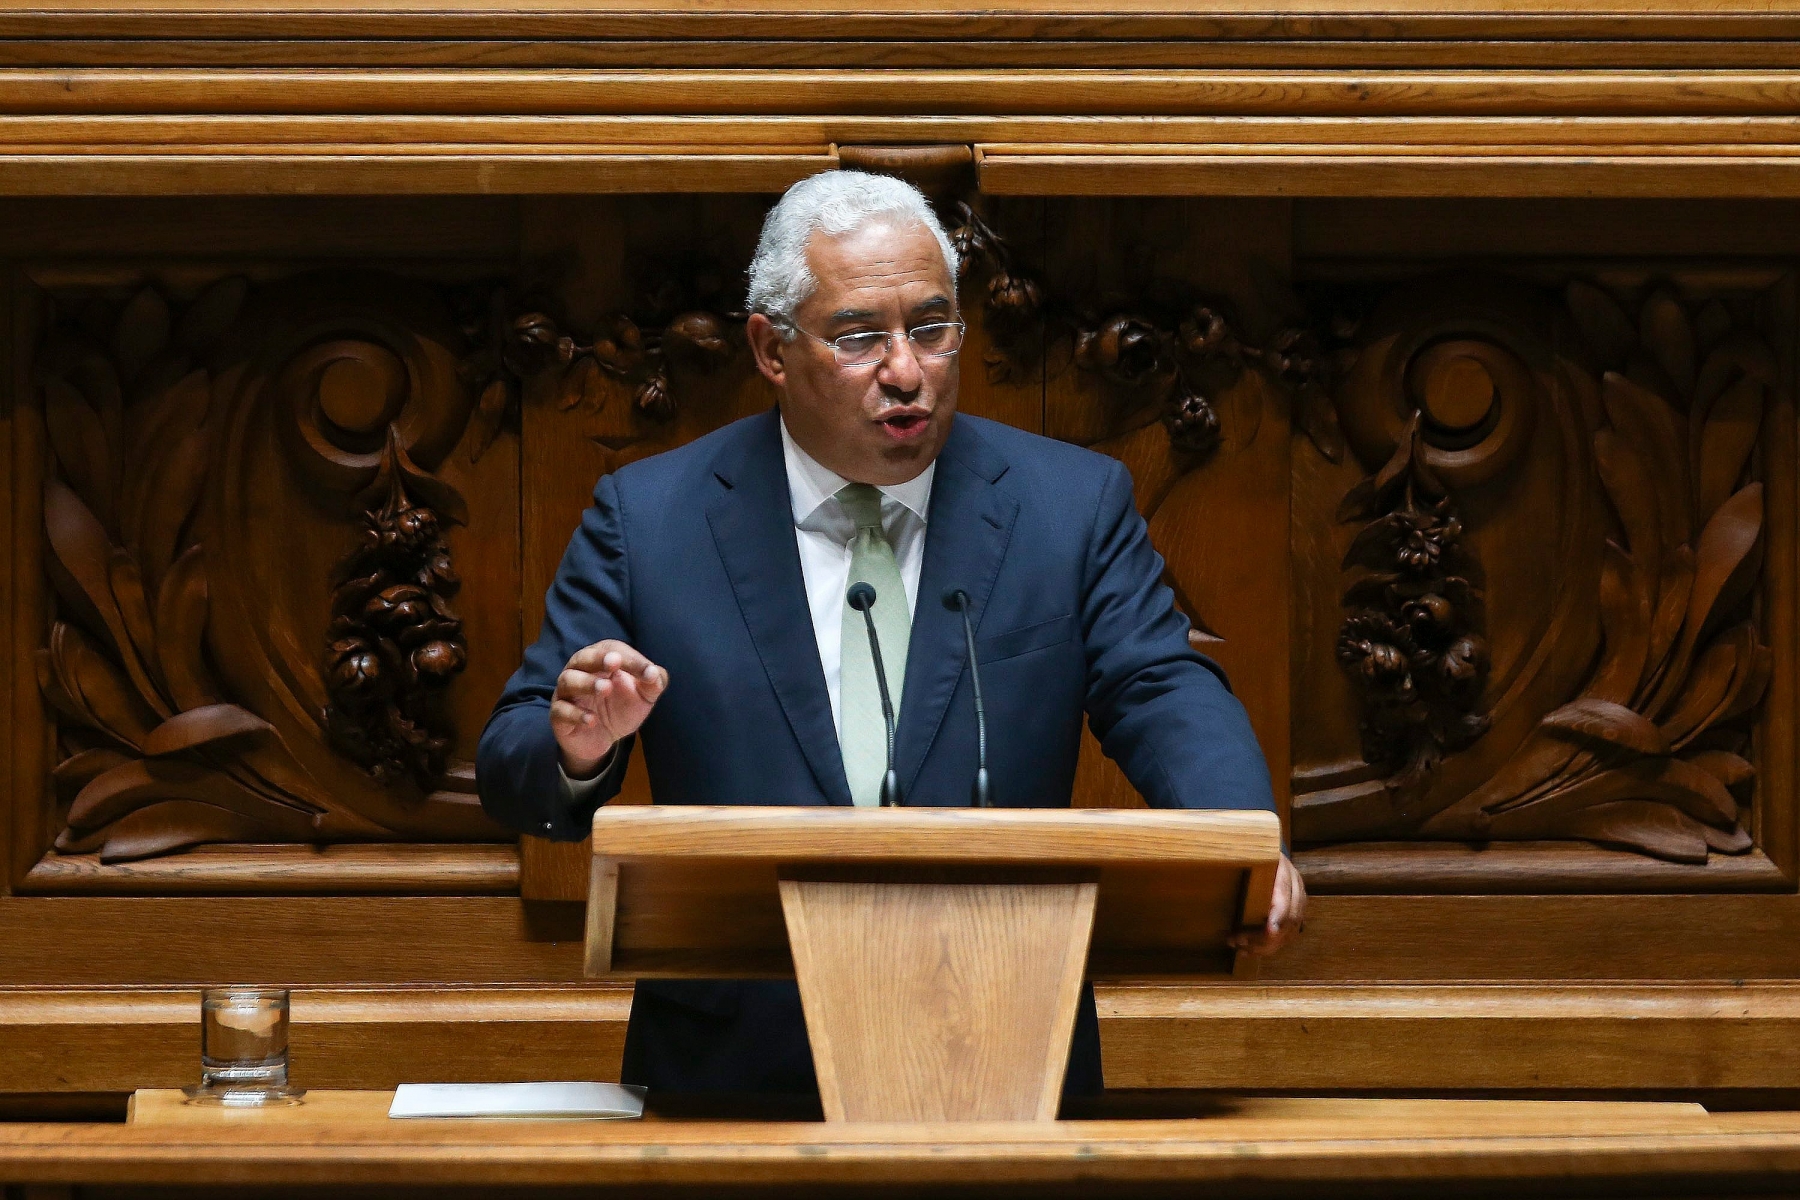 epa05413111 Portugal Prime Minister, Antonio Costa, delivers a speech during the debate on the State of the Nation in the parliament, Lisbon, Portugal, 07 July 2016. The Prime Minister socialist Antonio Costa stated that Portugal will end the year 2016 with a deficit according to EU rules. Portugal and Spain presently face the possibility of sanctions after faiiling to meet EU deficit rules.  EPA/MARIO CRUZ PORTUGAL PARLIAMENT